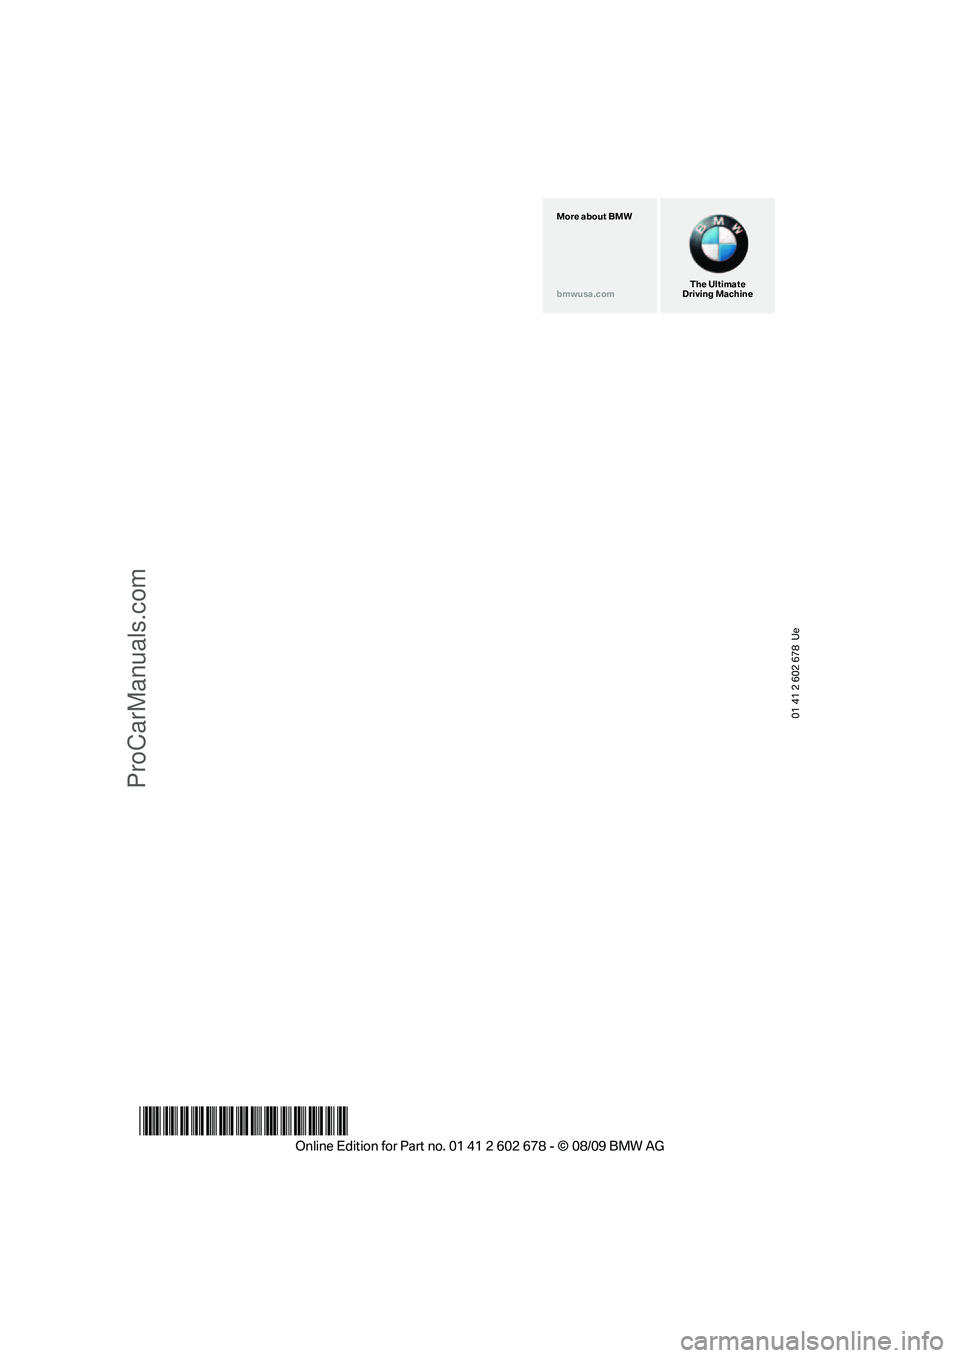 BMW 5 SERIES 2010  Owners Manual 01 41 2 602 678  Ue
*BL2602678009*
The Ultimate
Driving Machine More about BMW
bmwusa.com
ProCarManuals.com 